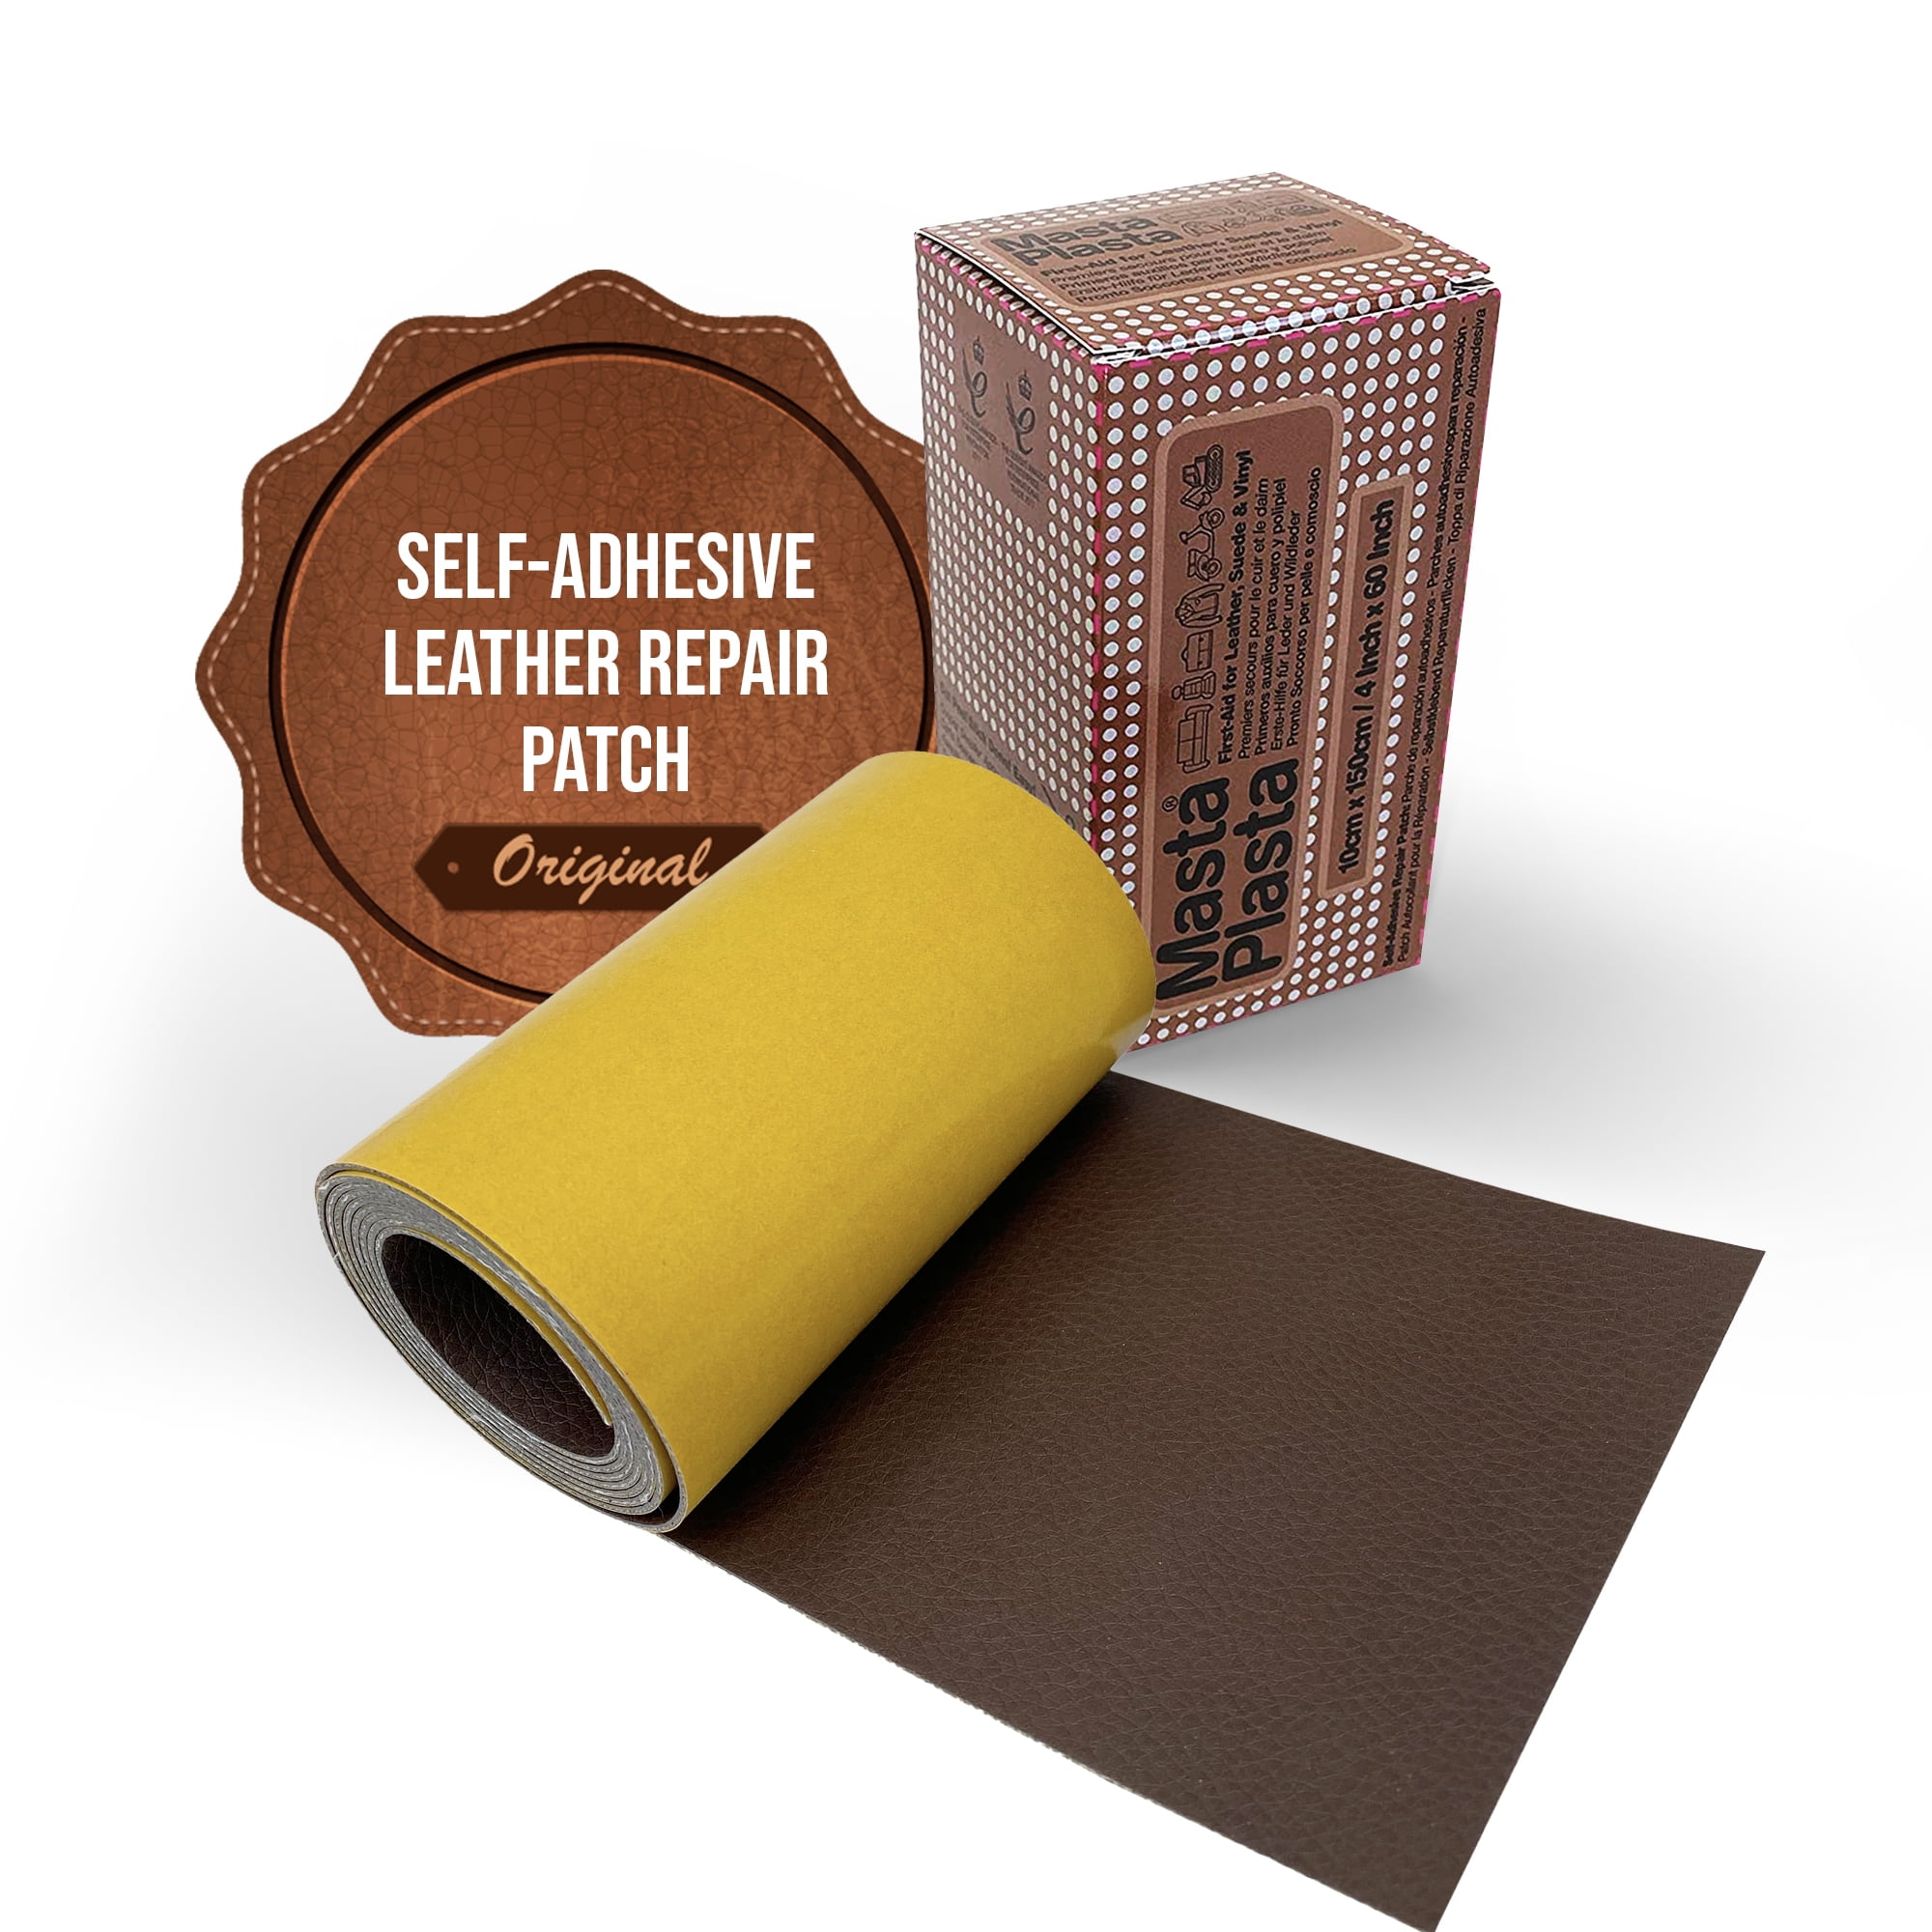 Extra Large MastaPlasta Instant Self-Adhesive Leather Repair Patch IVORY 11  x 8 in (28 x 20 cm). The Fast, Easy Way to Repair Upholstery, Car Seats,  Bags, Sofas and More 